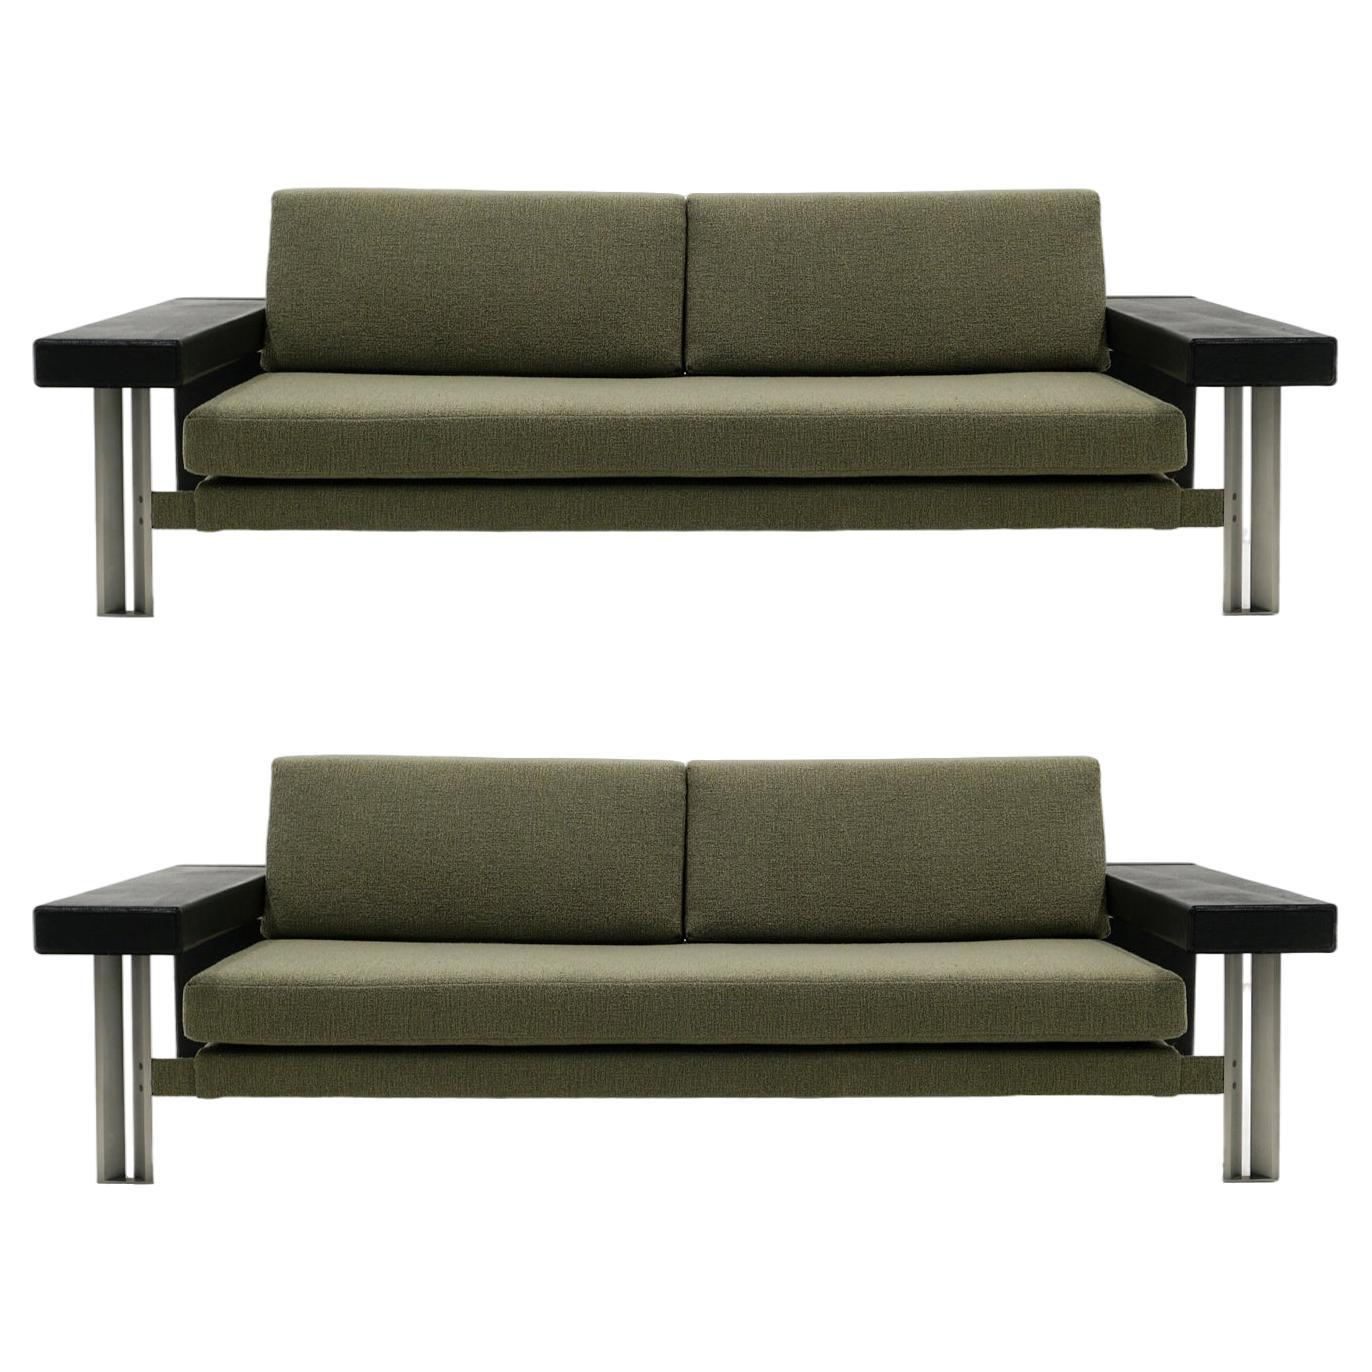 Pair of Sofas by Giovanni Offredi for Saporiti, Italy, 1970s.  Ready to Use.